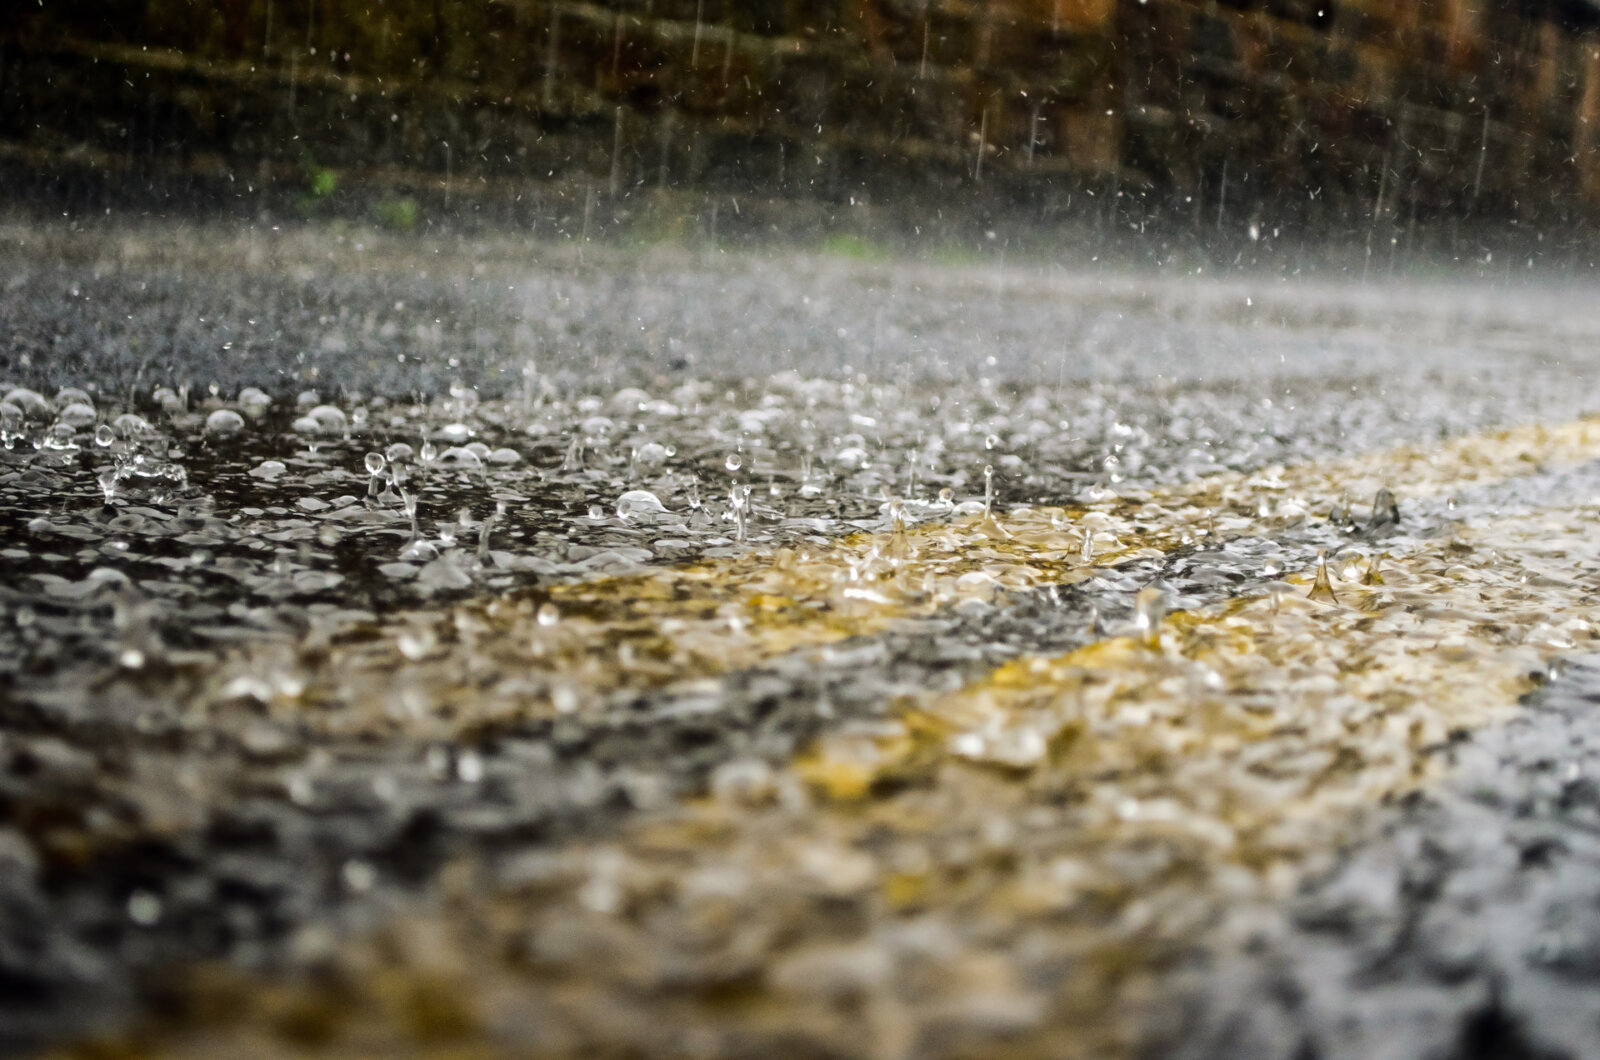 The wettest day in the UK since records began was recorded this month, The Manc